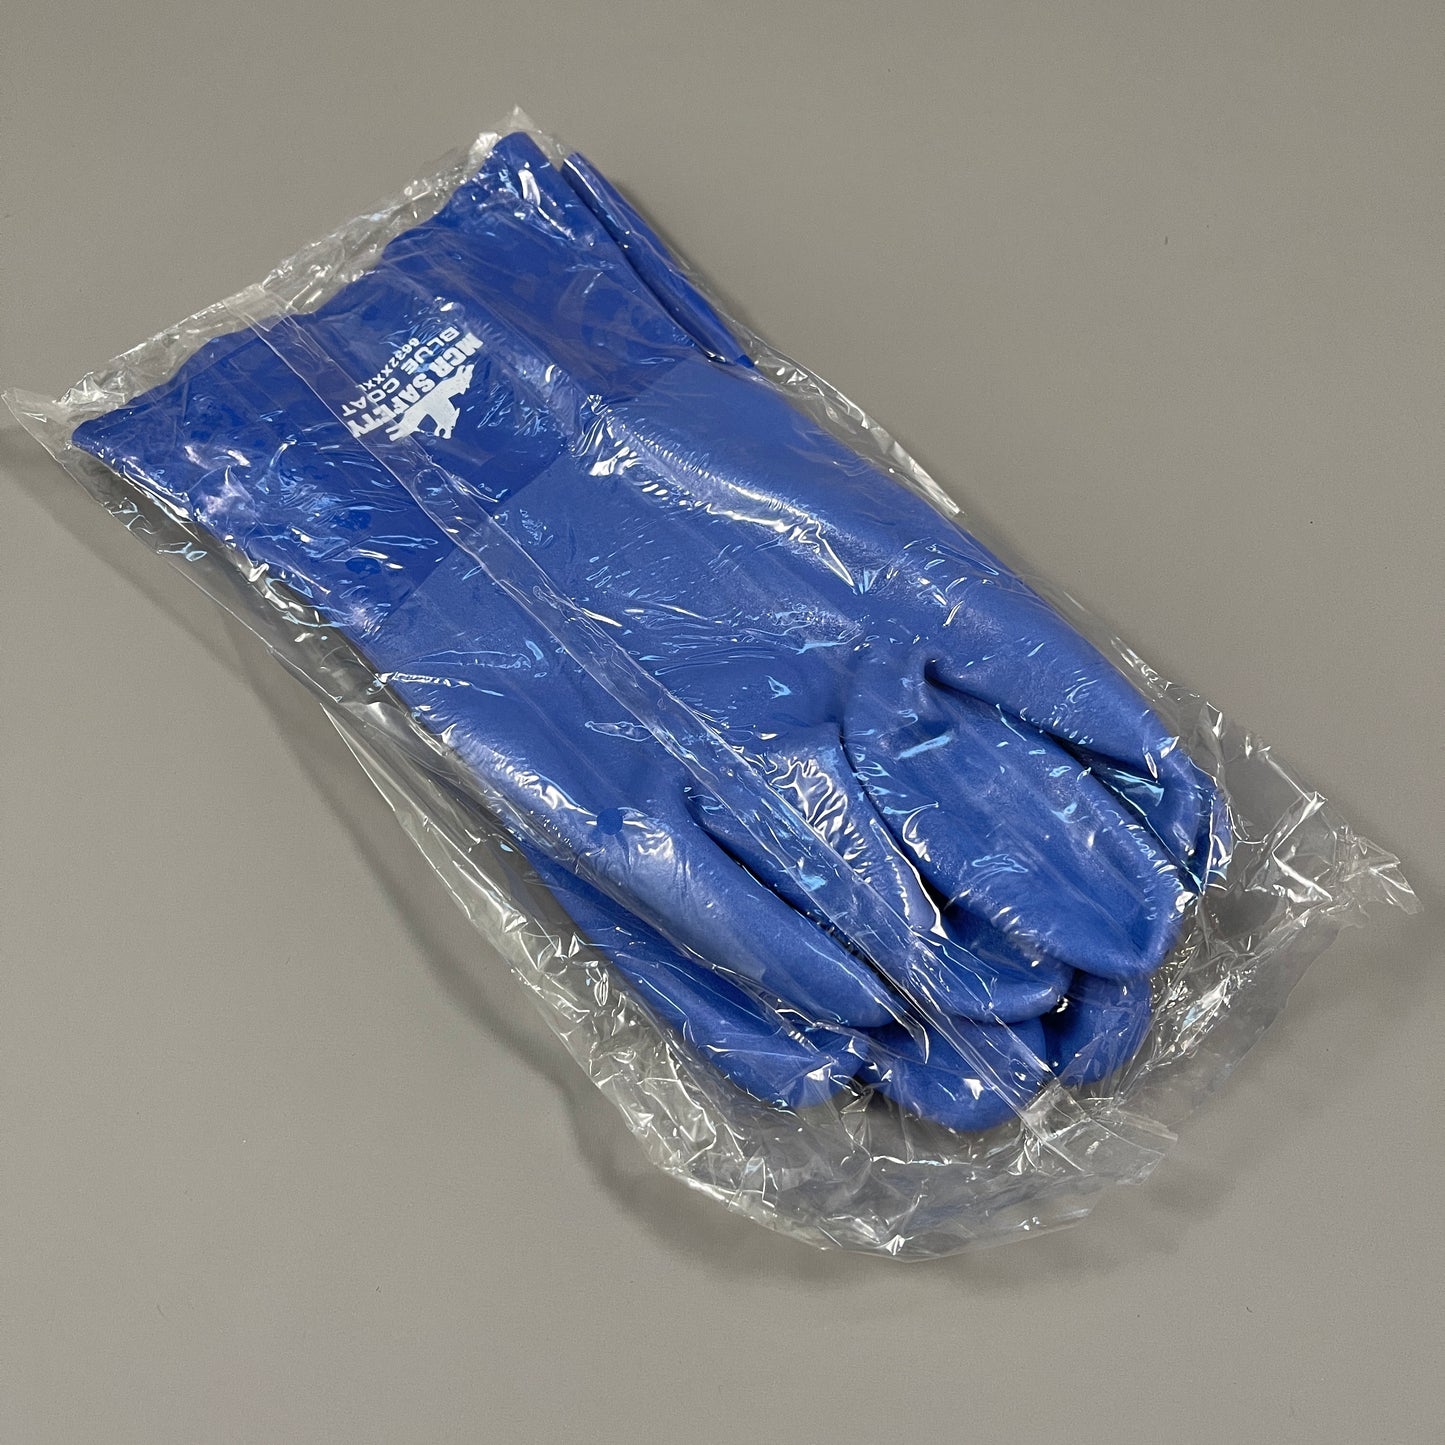 MCR SAFETY Blue Coat Work Gloves PVC Coated Triple Dipped Sz 3XL Blue (New)